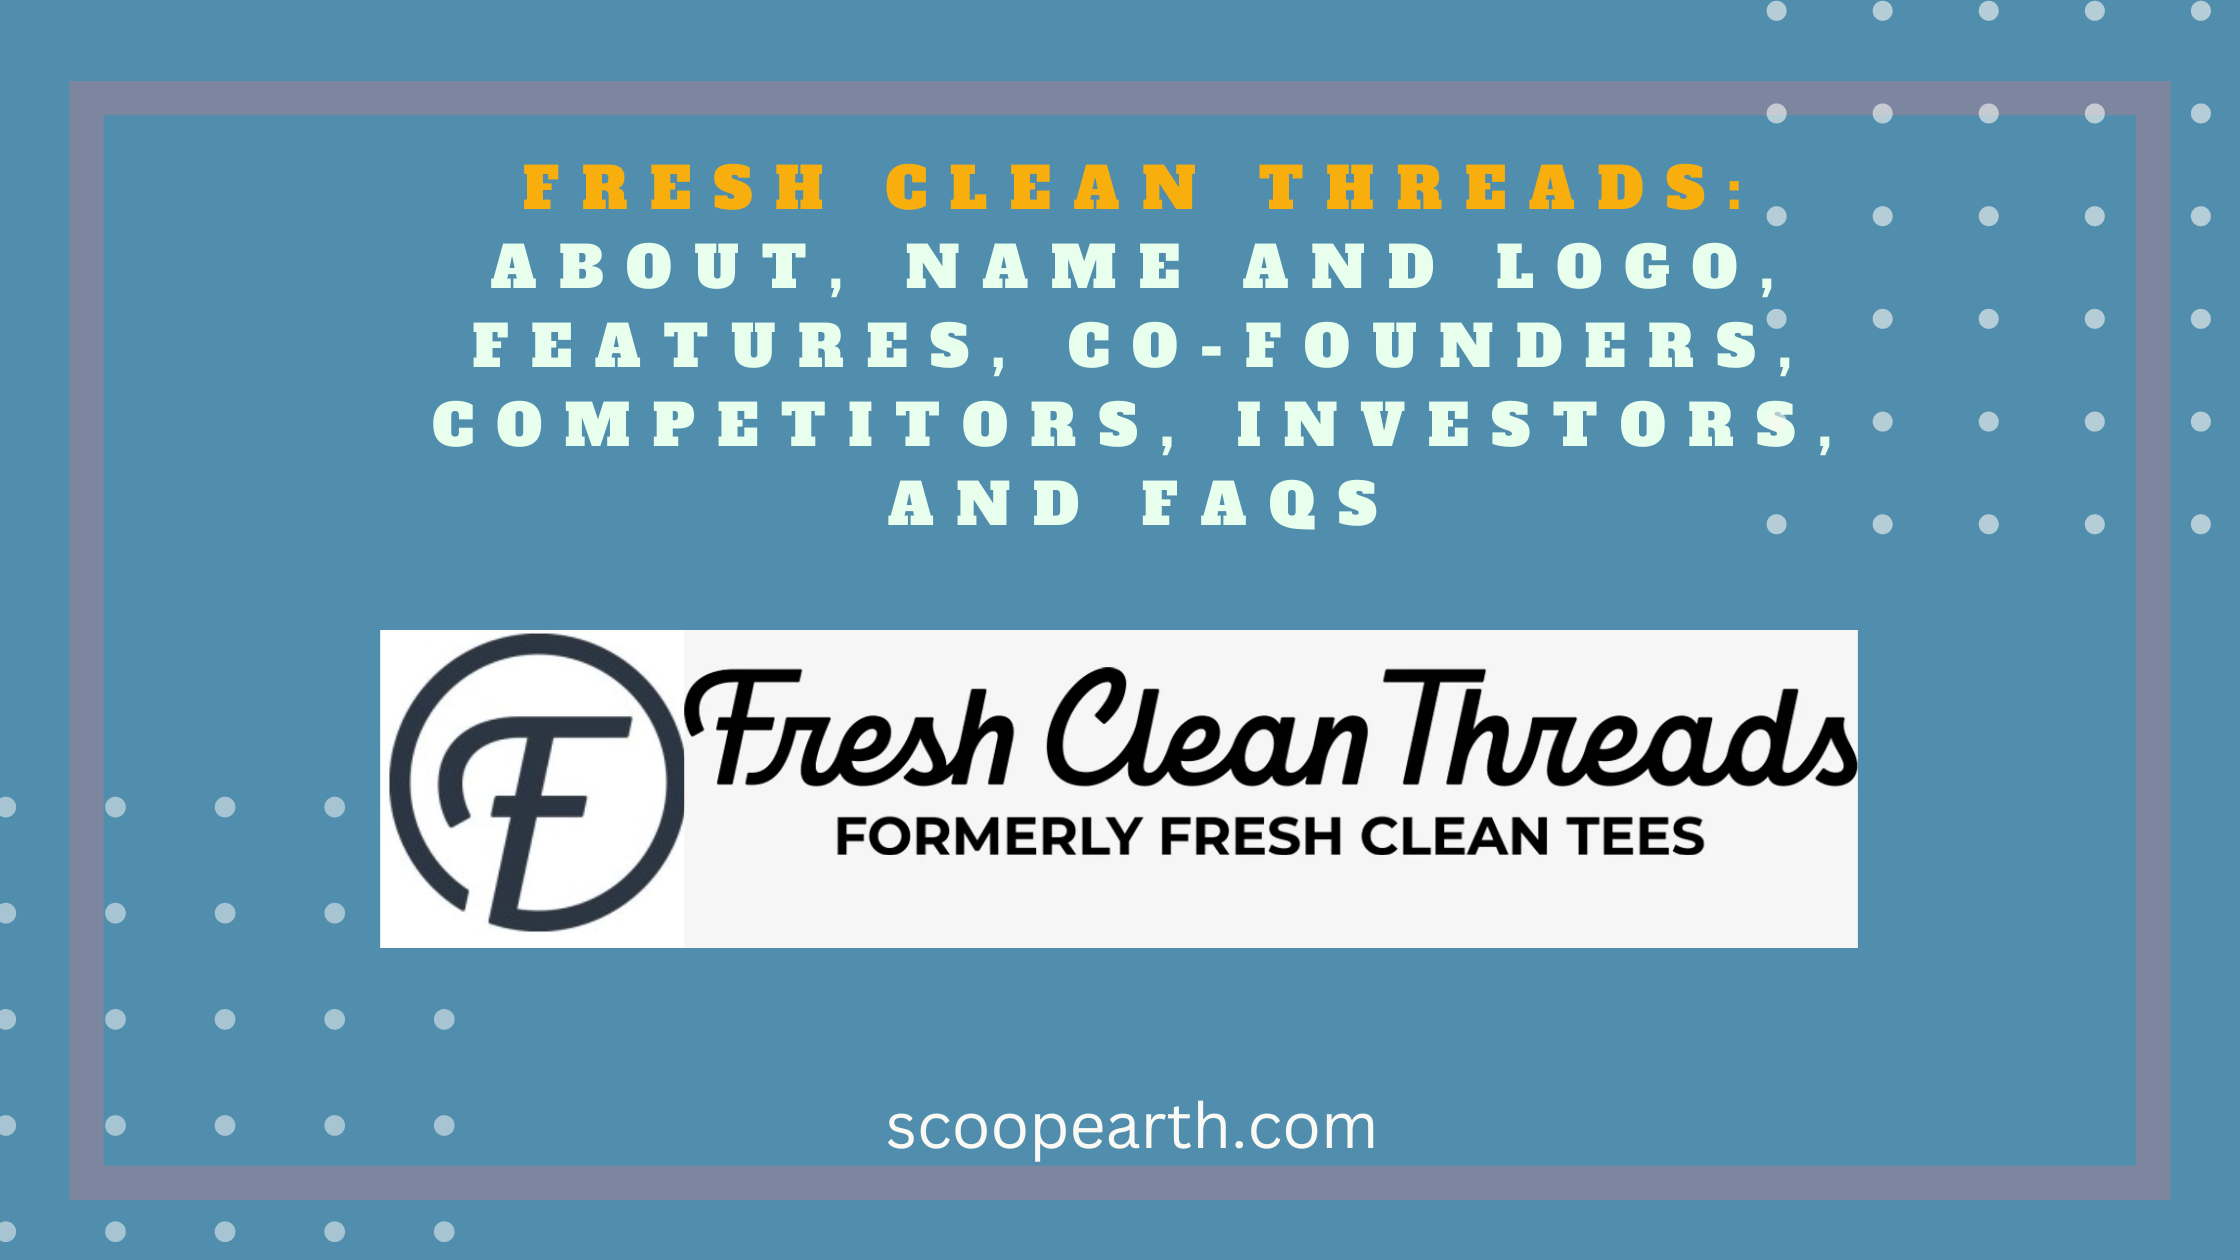 Fresh Clean Threads: About, Name And Logo, Features, Co-Founders, Competitors, Investors, And Faqs